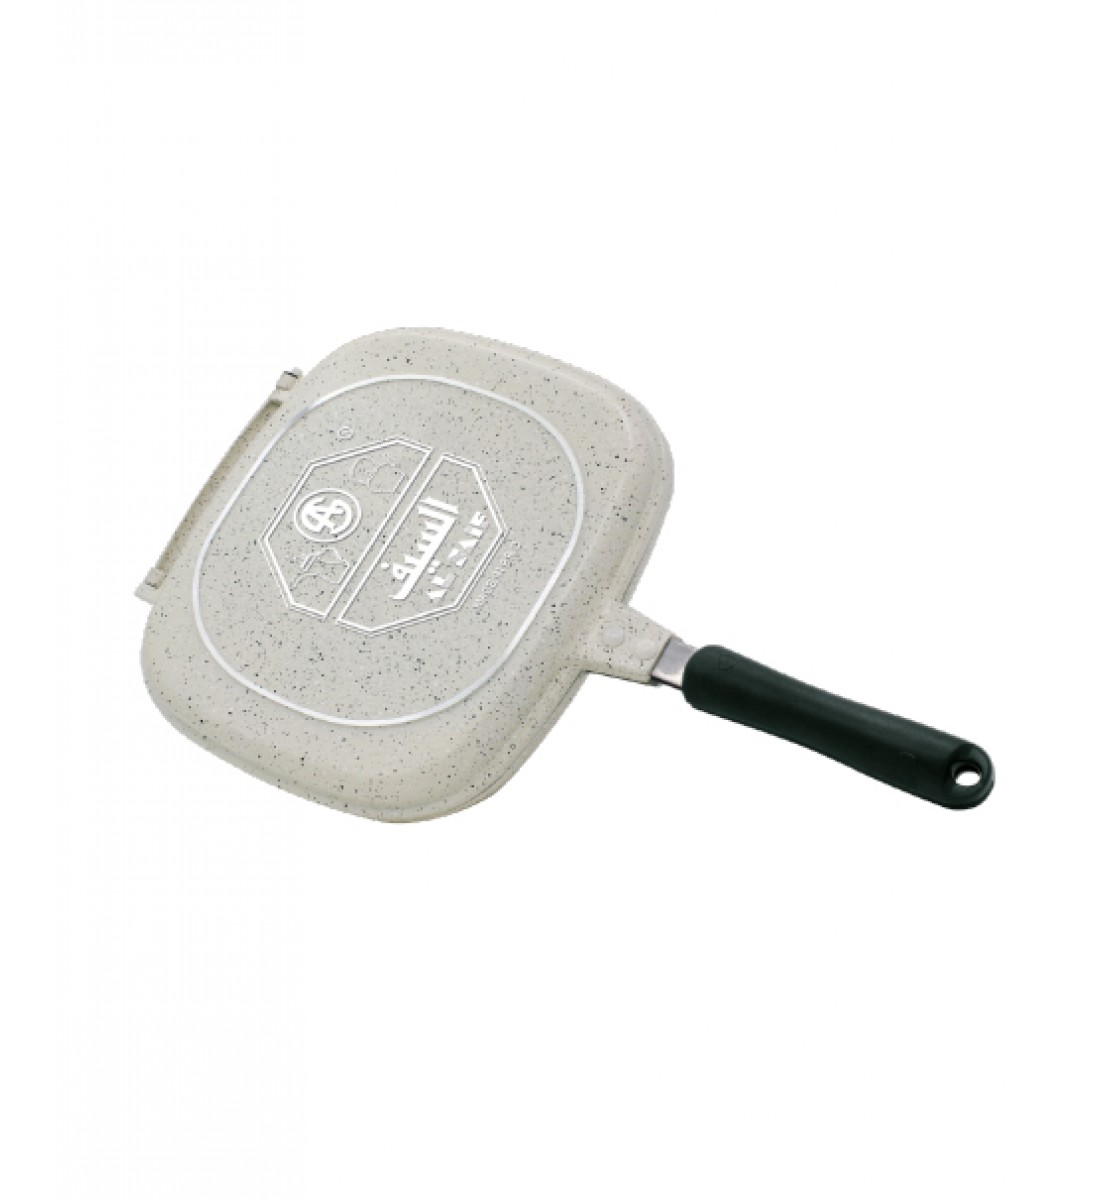 Neoflam double sided grill pan - 36 cm